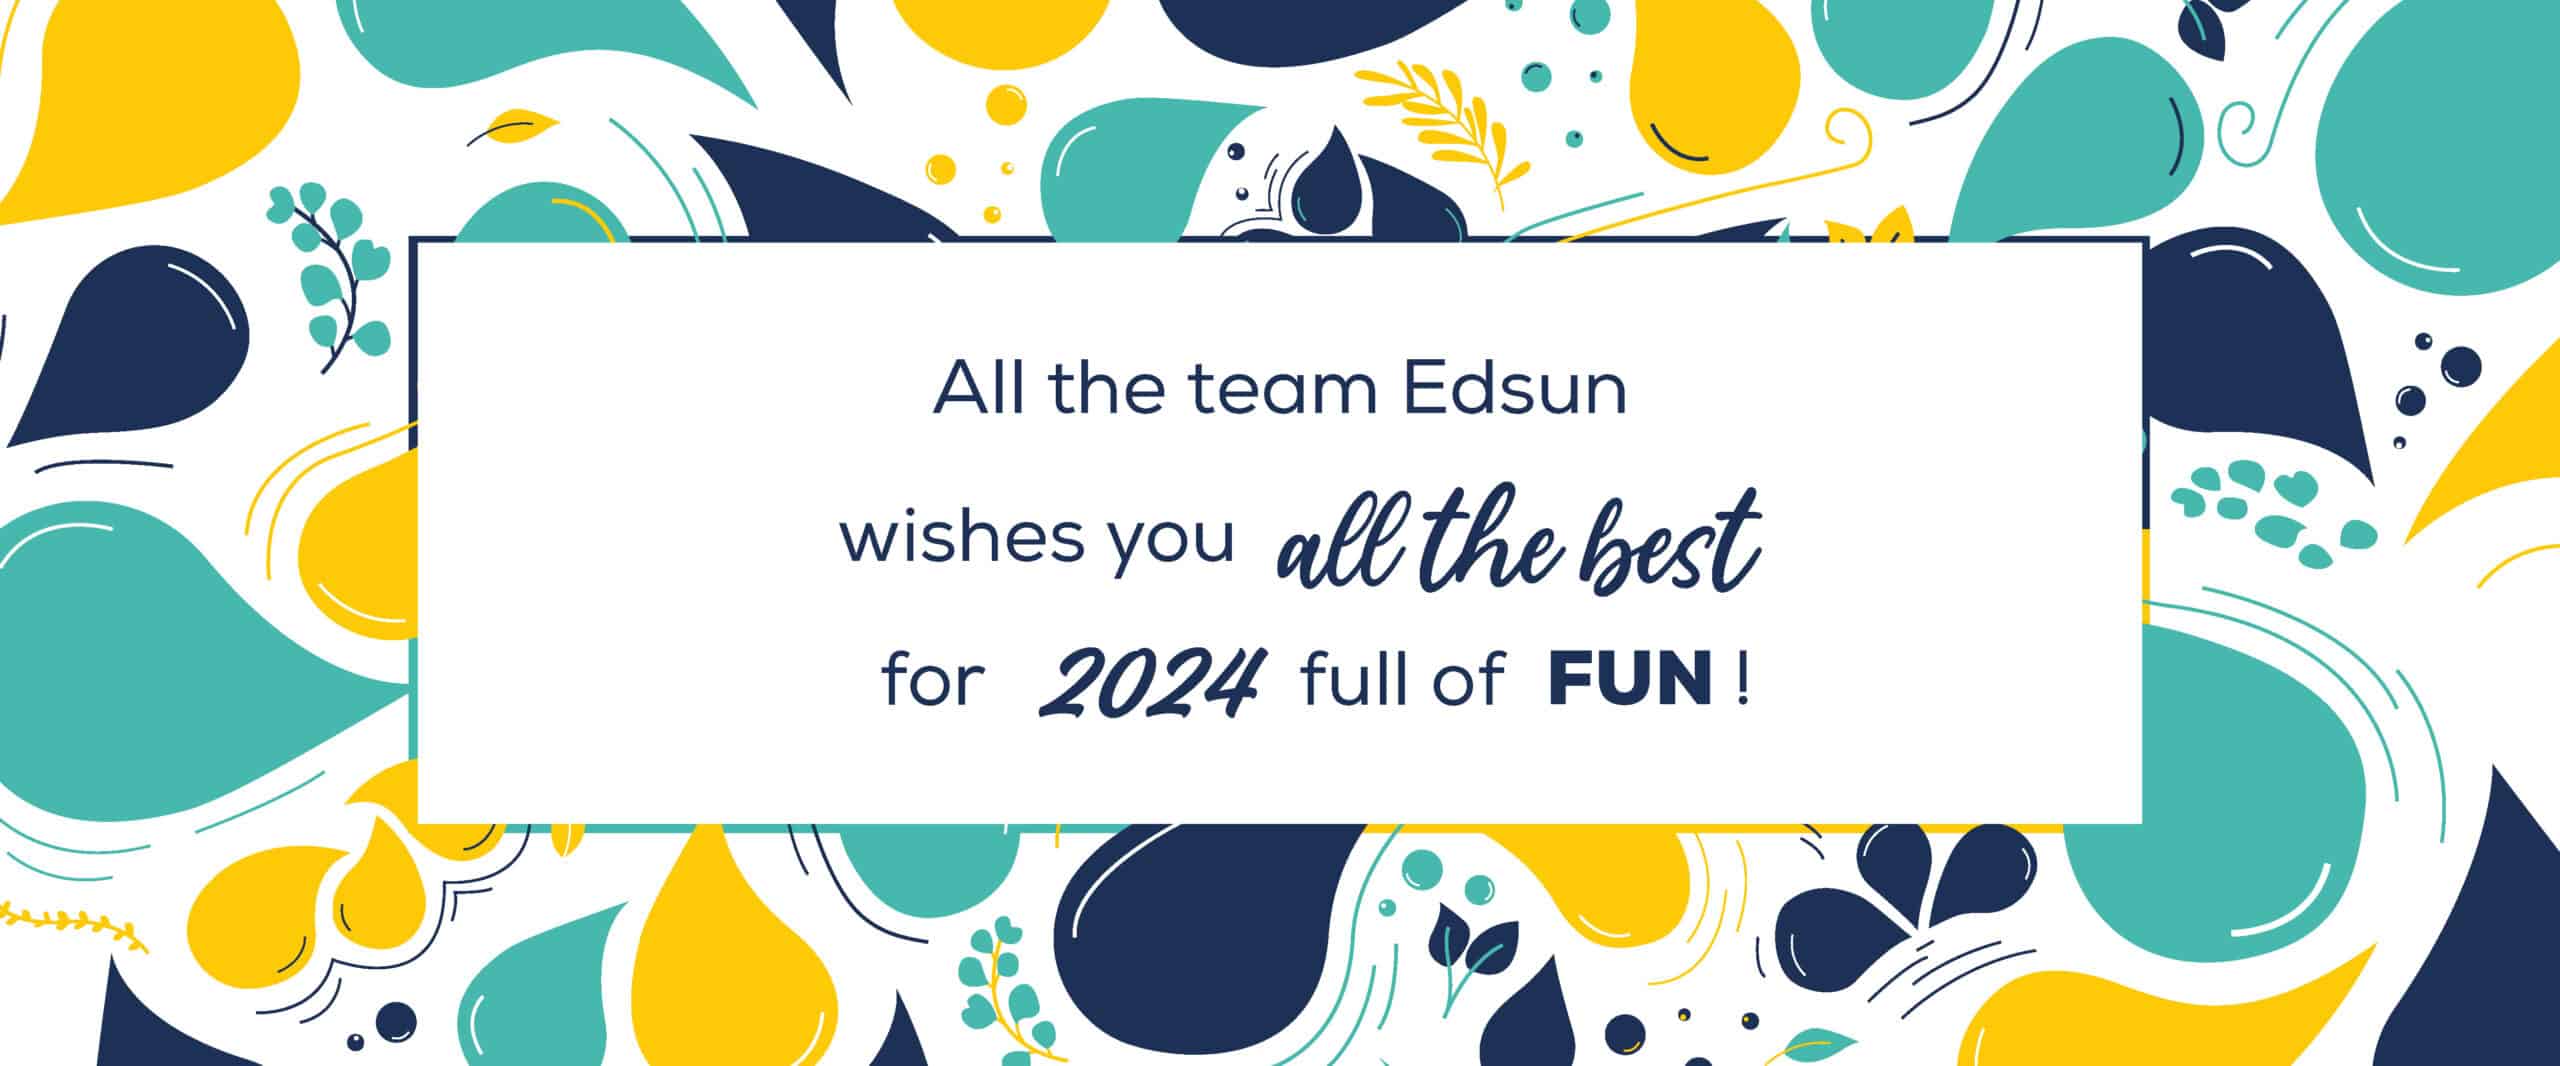 All the team Edsun wishes you all the best for 2024 full of fun